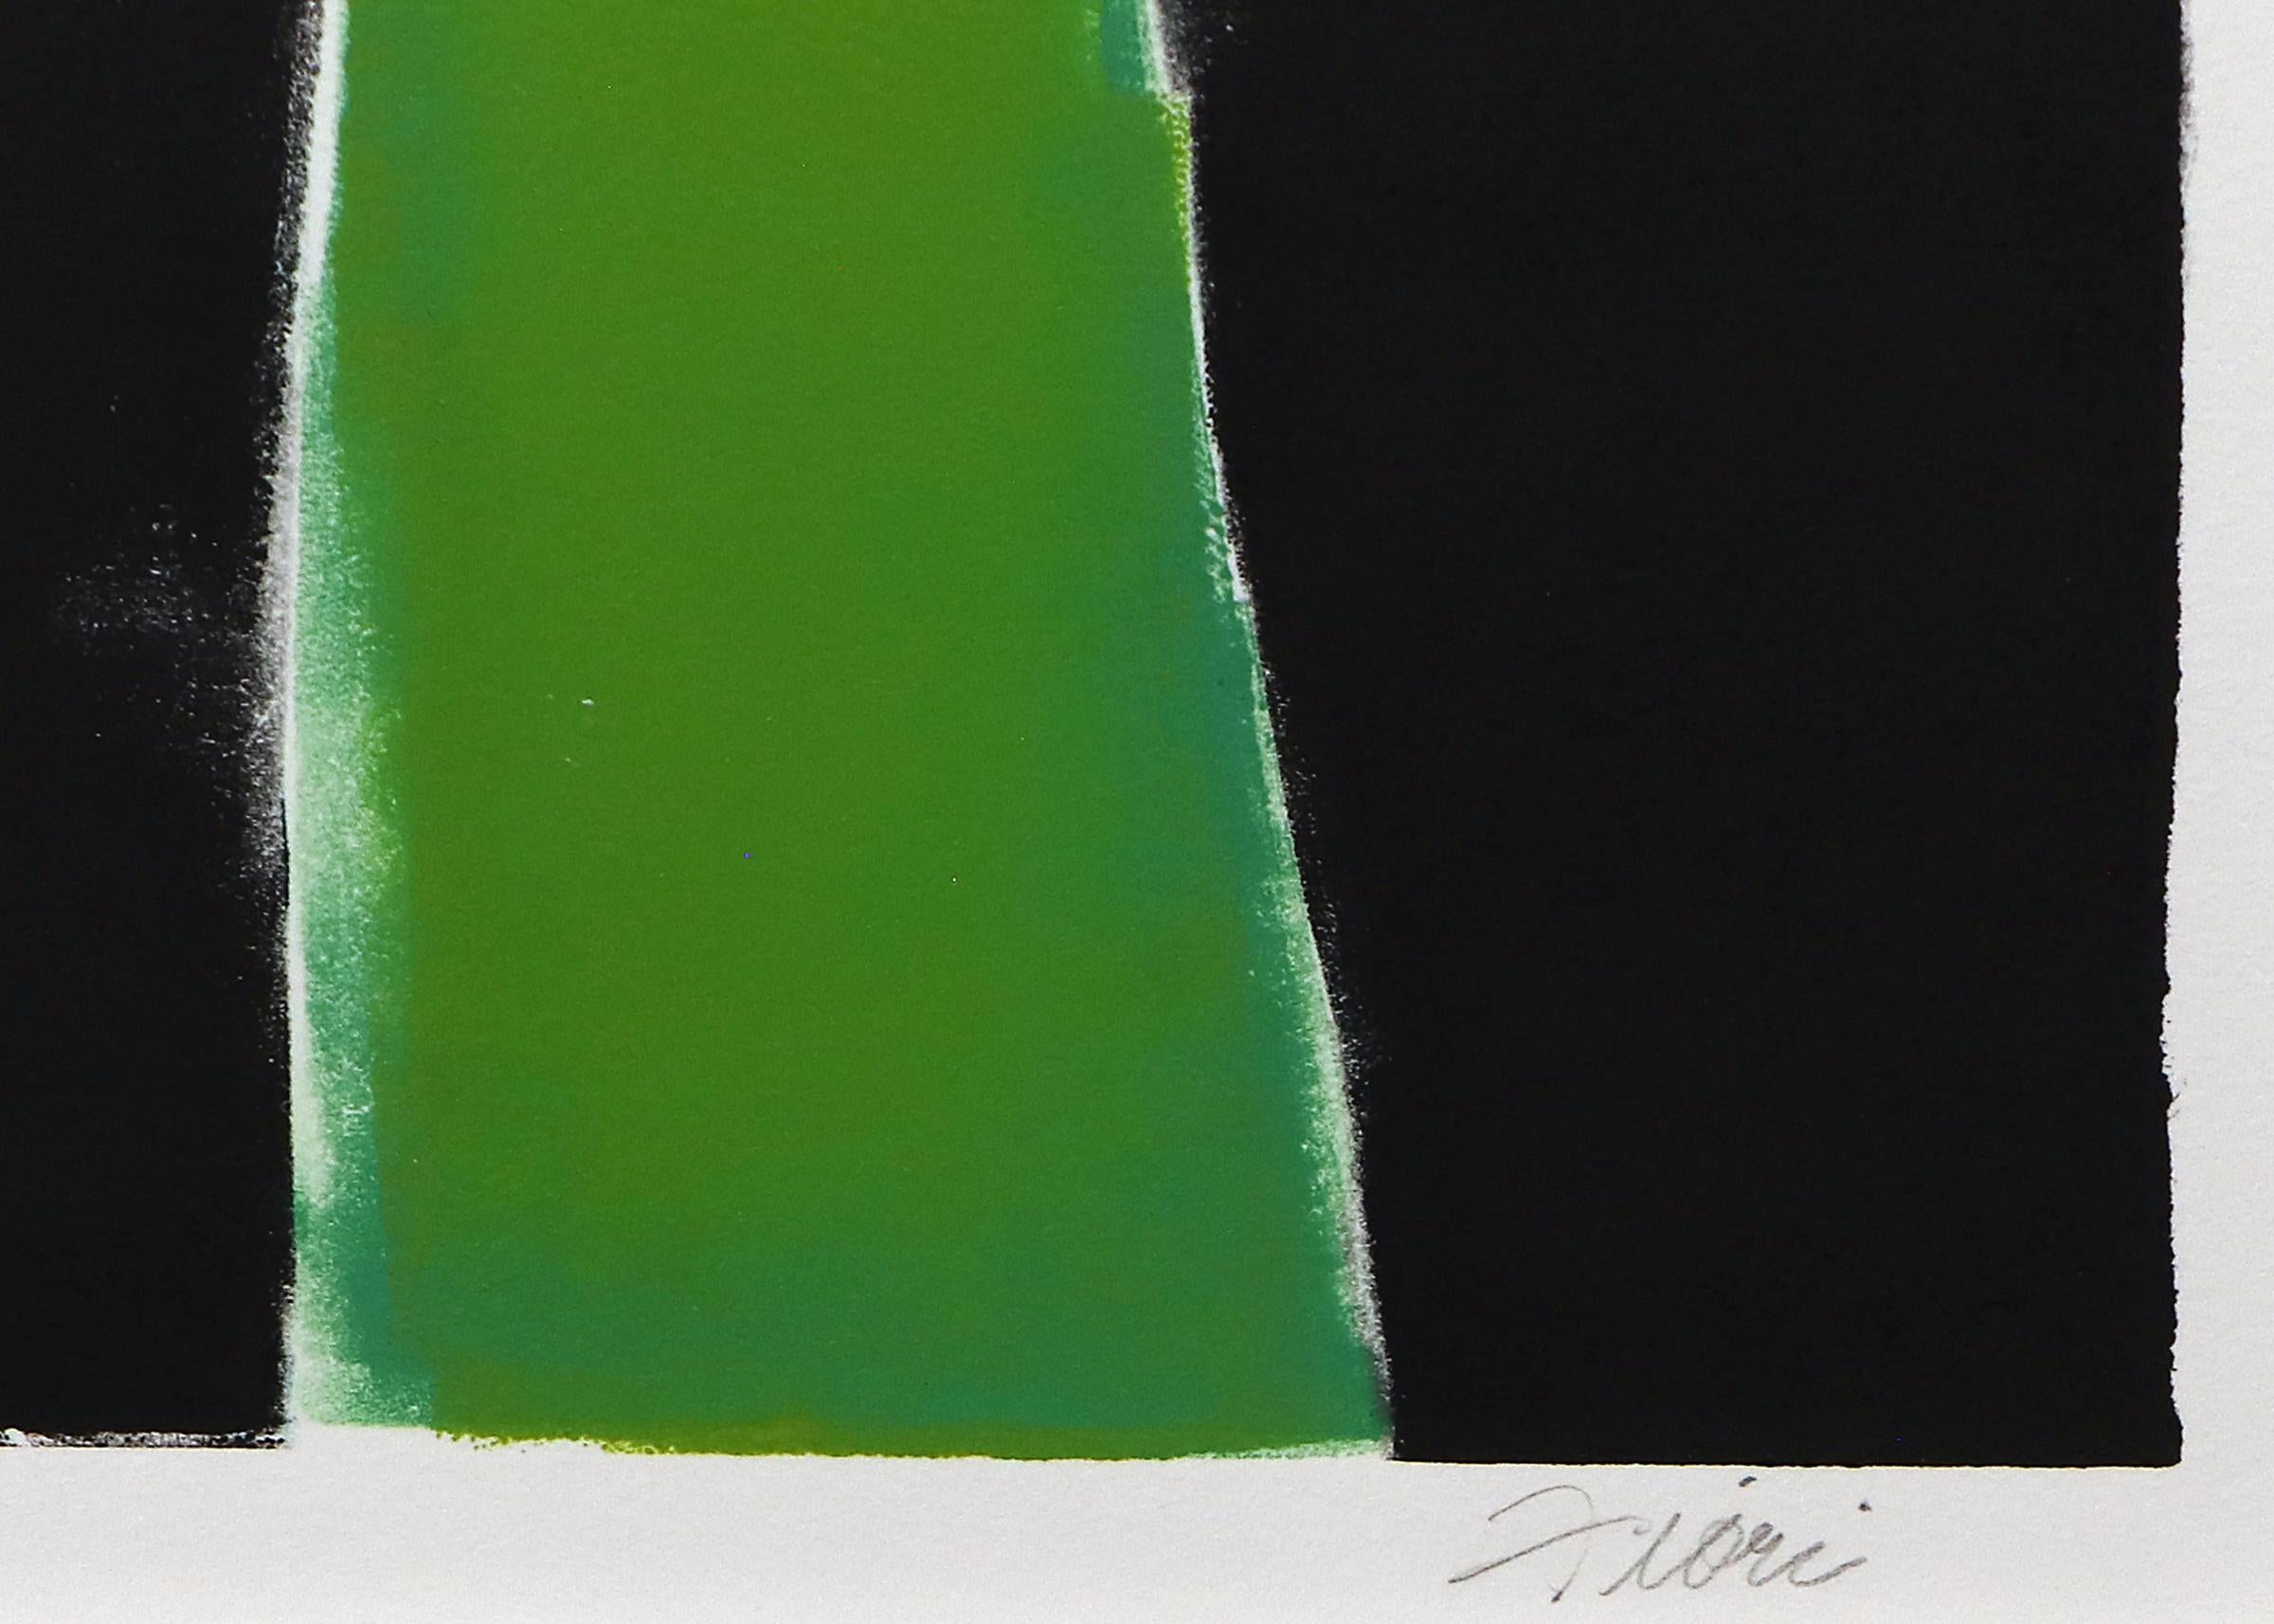 Abstract monotype painting by Colorado woman artist Wilma Fiori (1929-2019).  Abstract composition in deep jewel tones of green, orange, teal and purple on a black background.  Monotype (numbered 1/1) printed on paper, signed by the artist lower